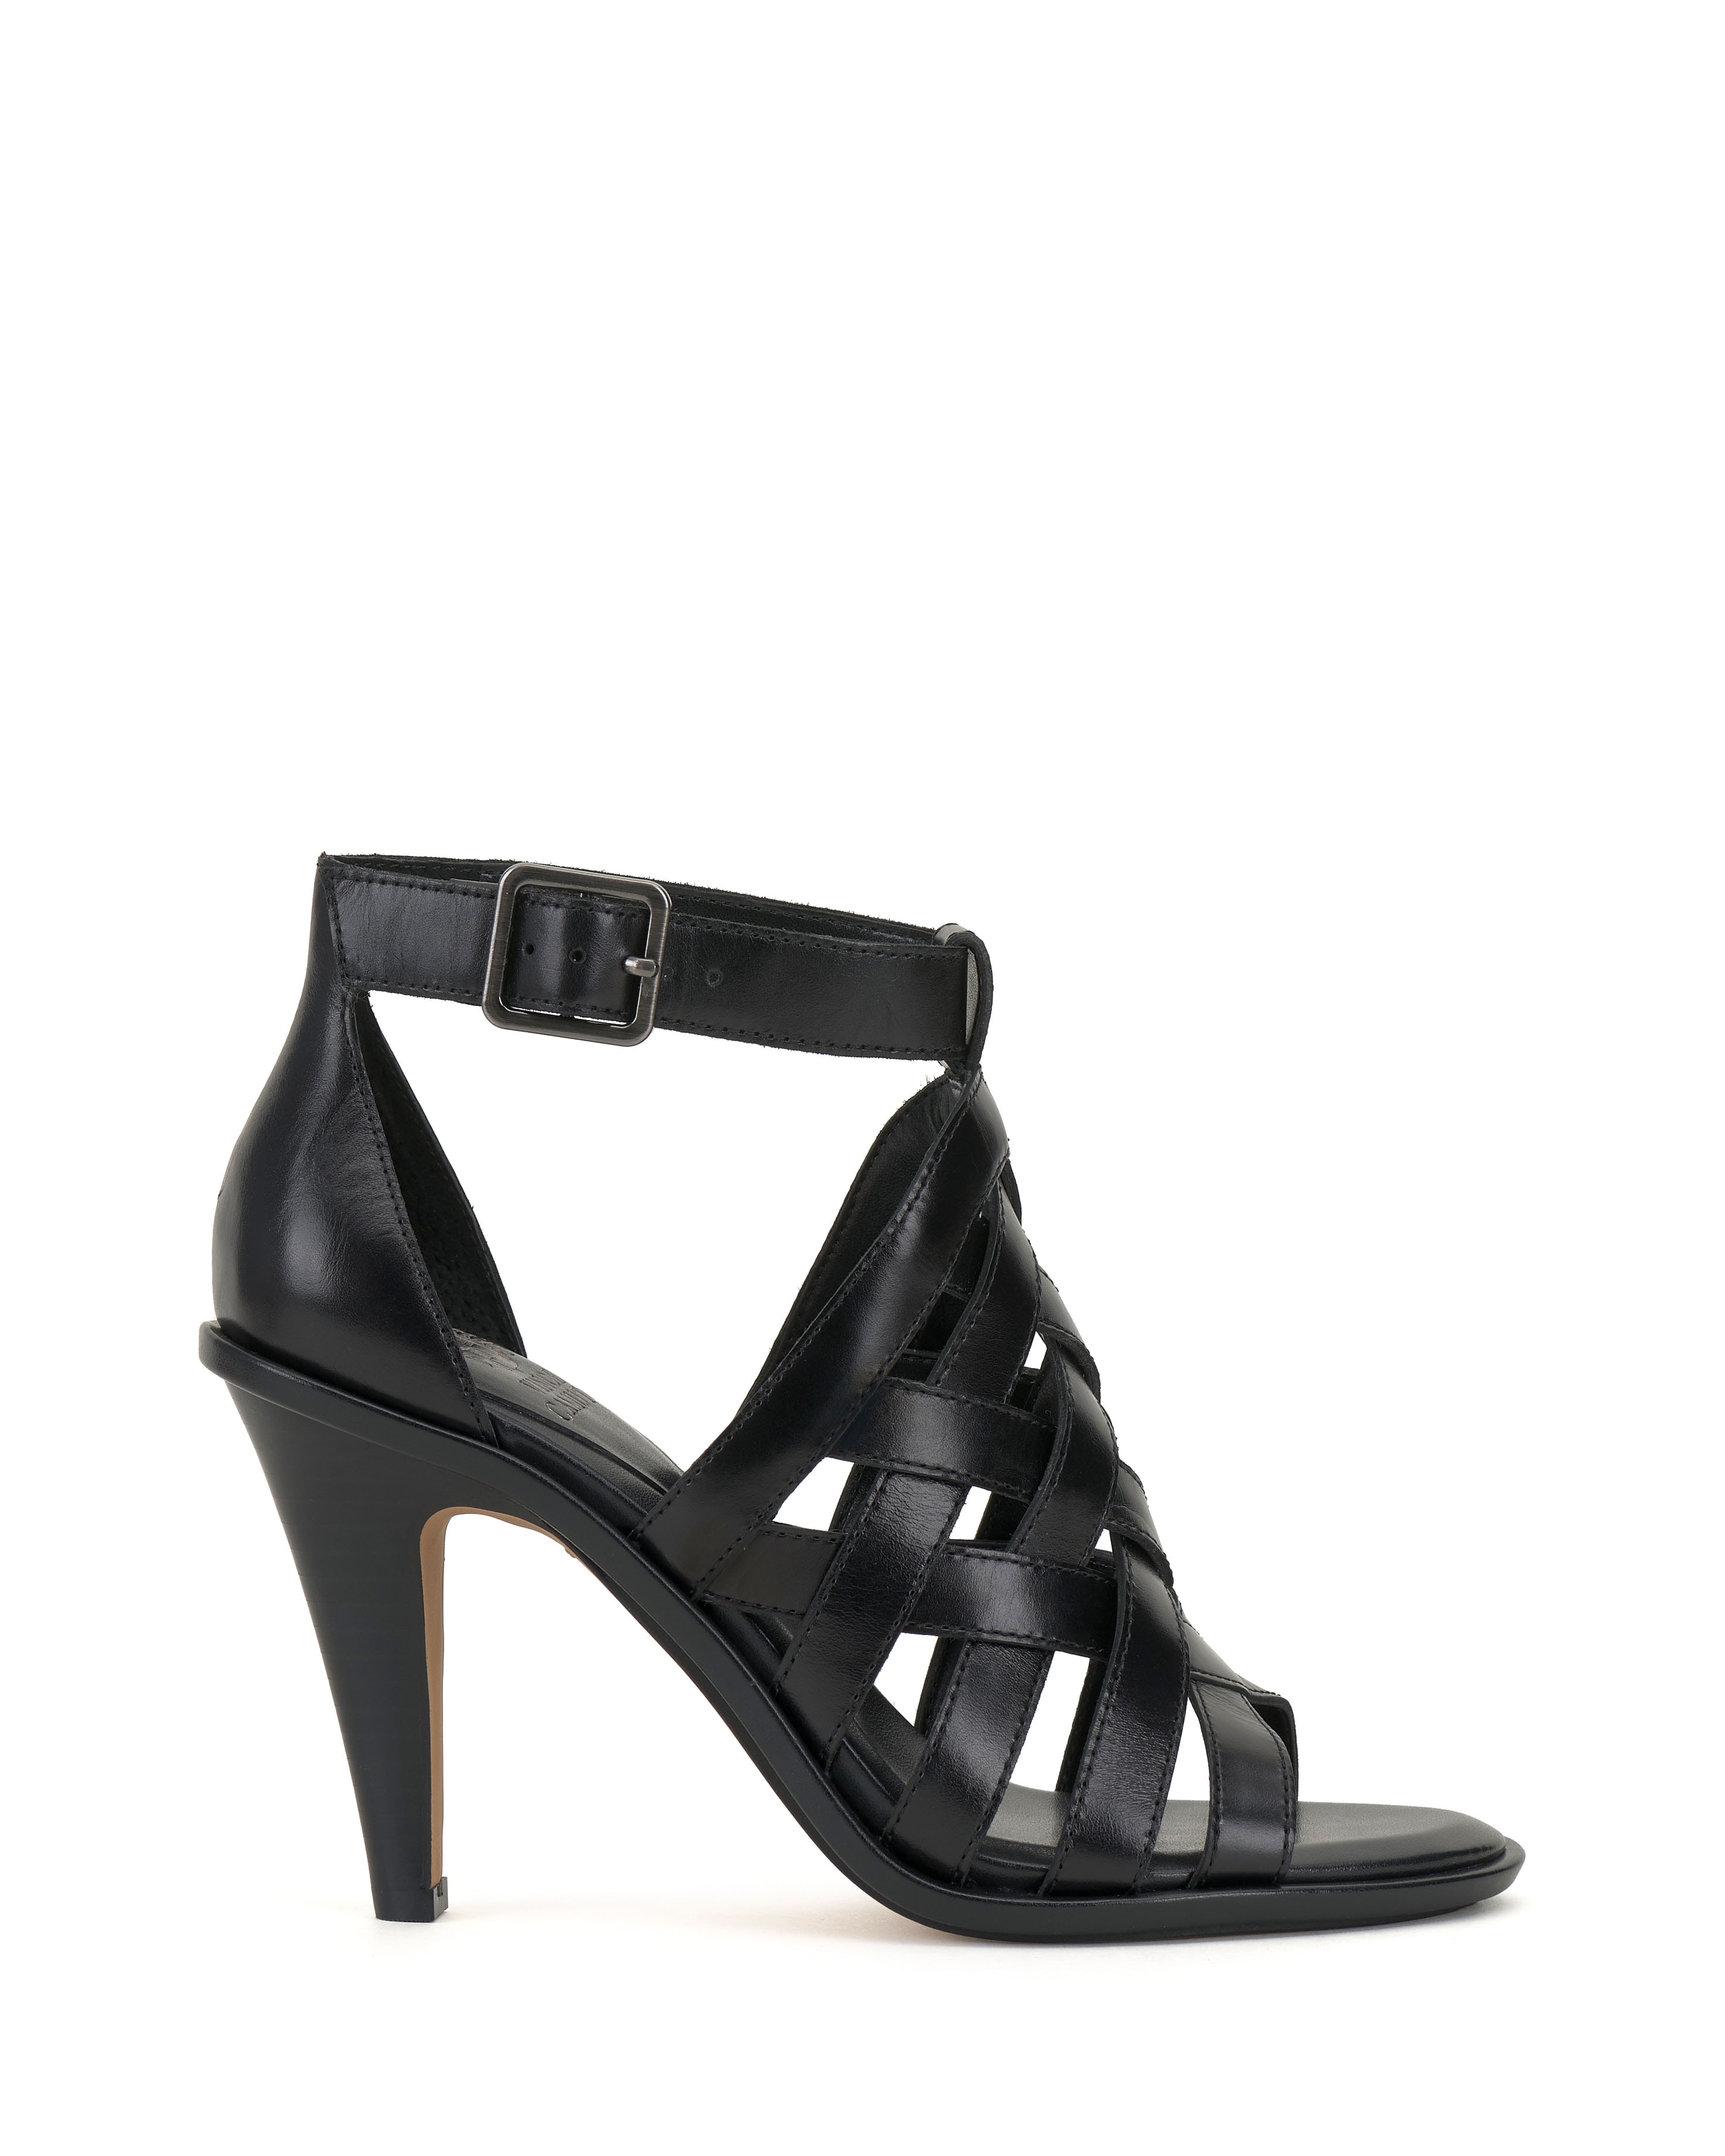 Vince Camuto Frelly Sandal | Vince Camuto